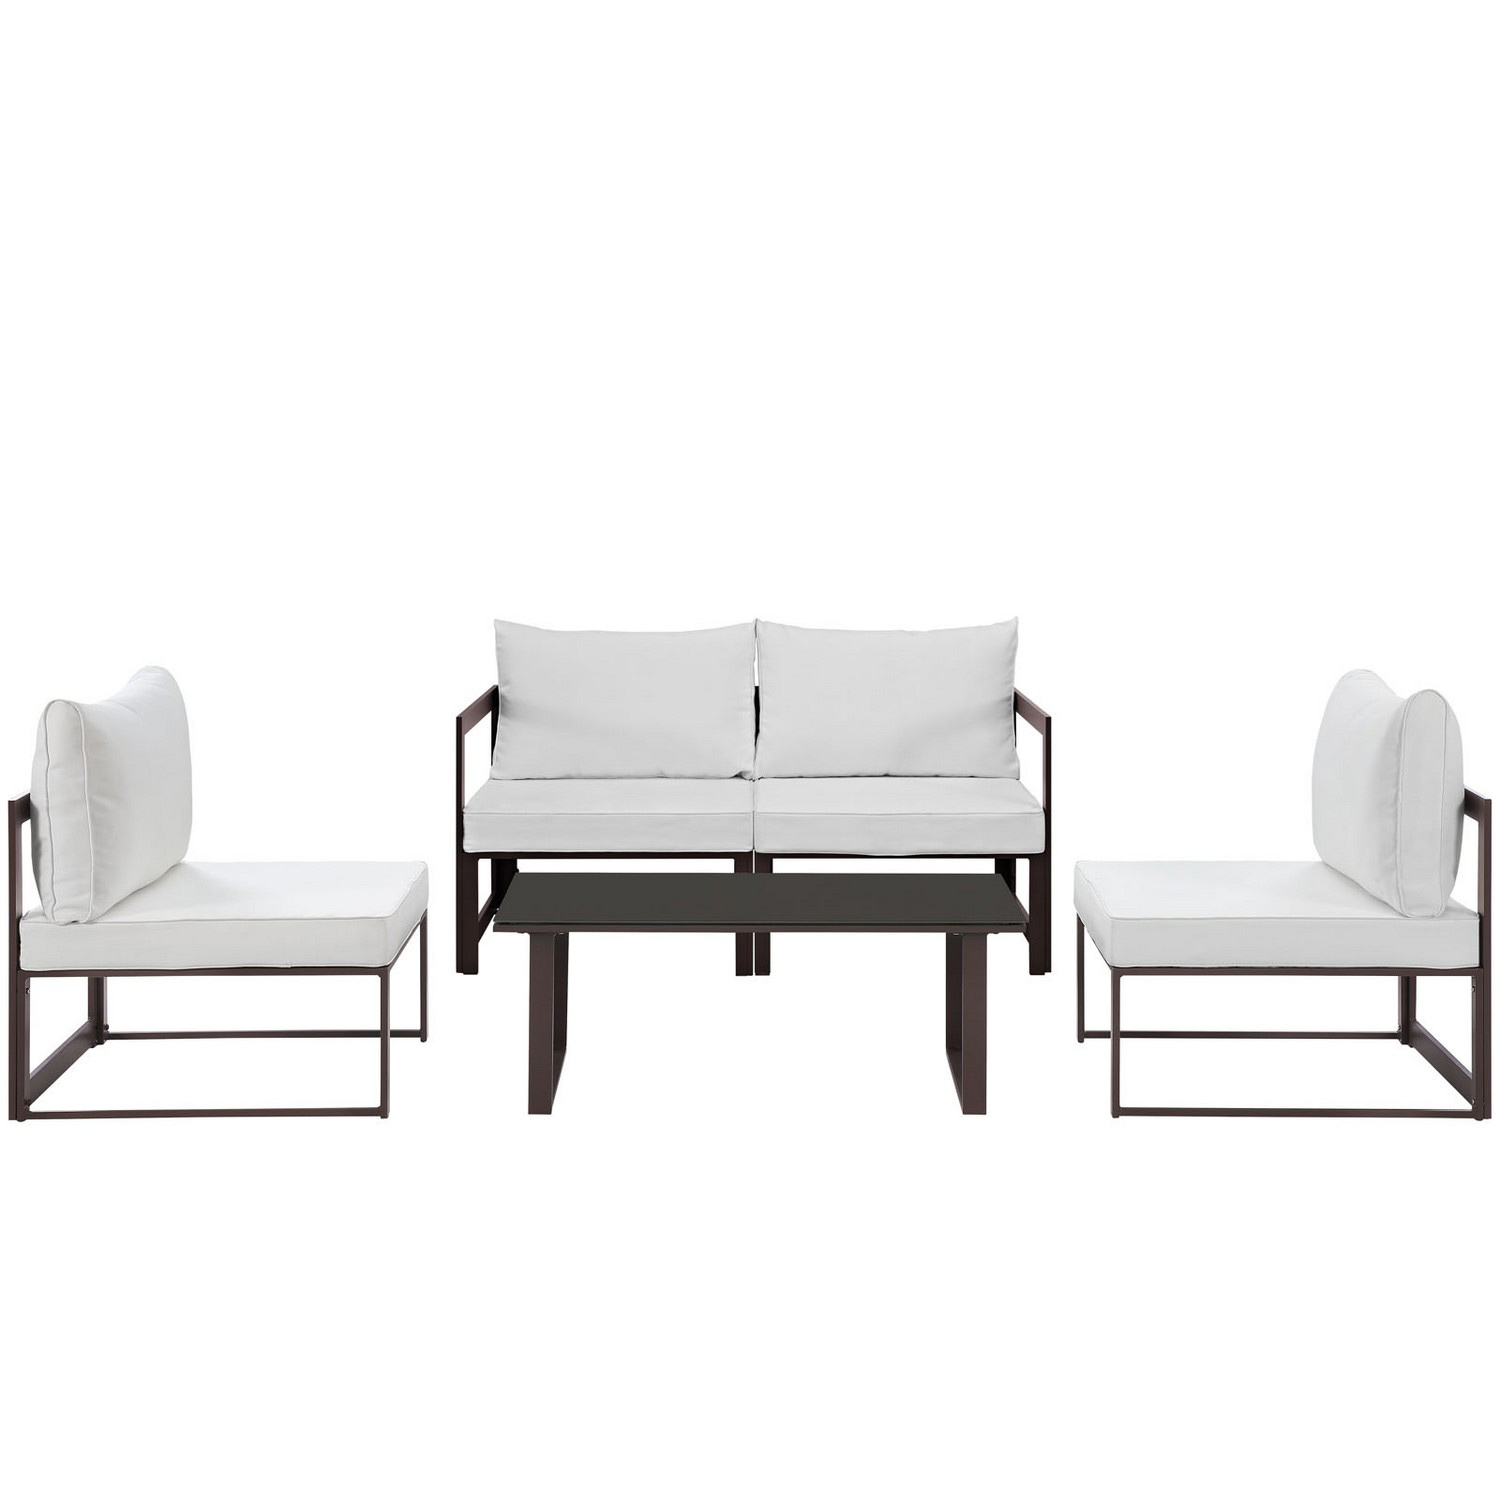 Modway Fortuna 5 Piece Outdoor Patio Sectional Sofa Set - Brown/White